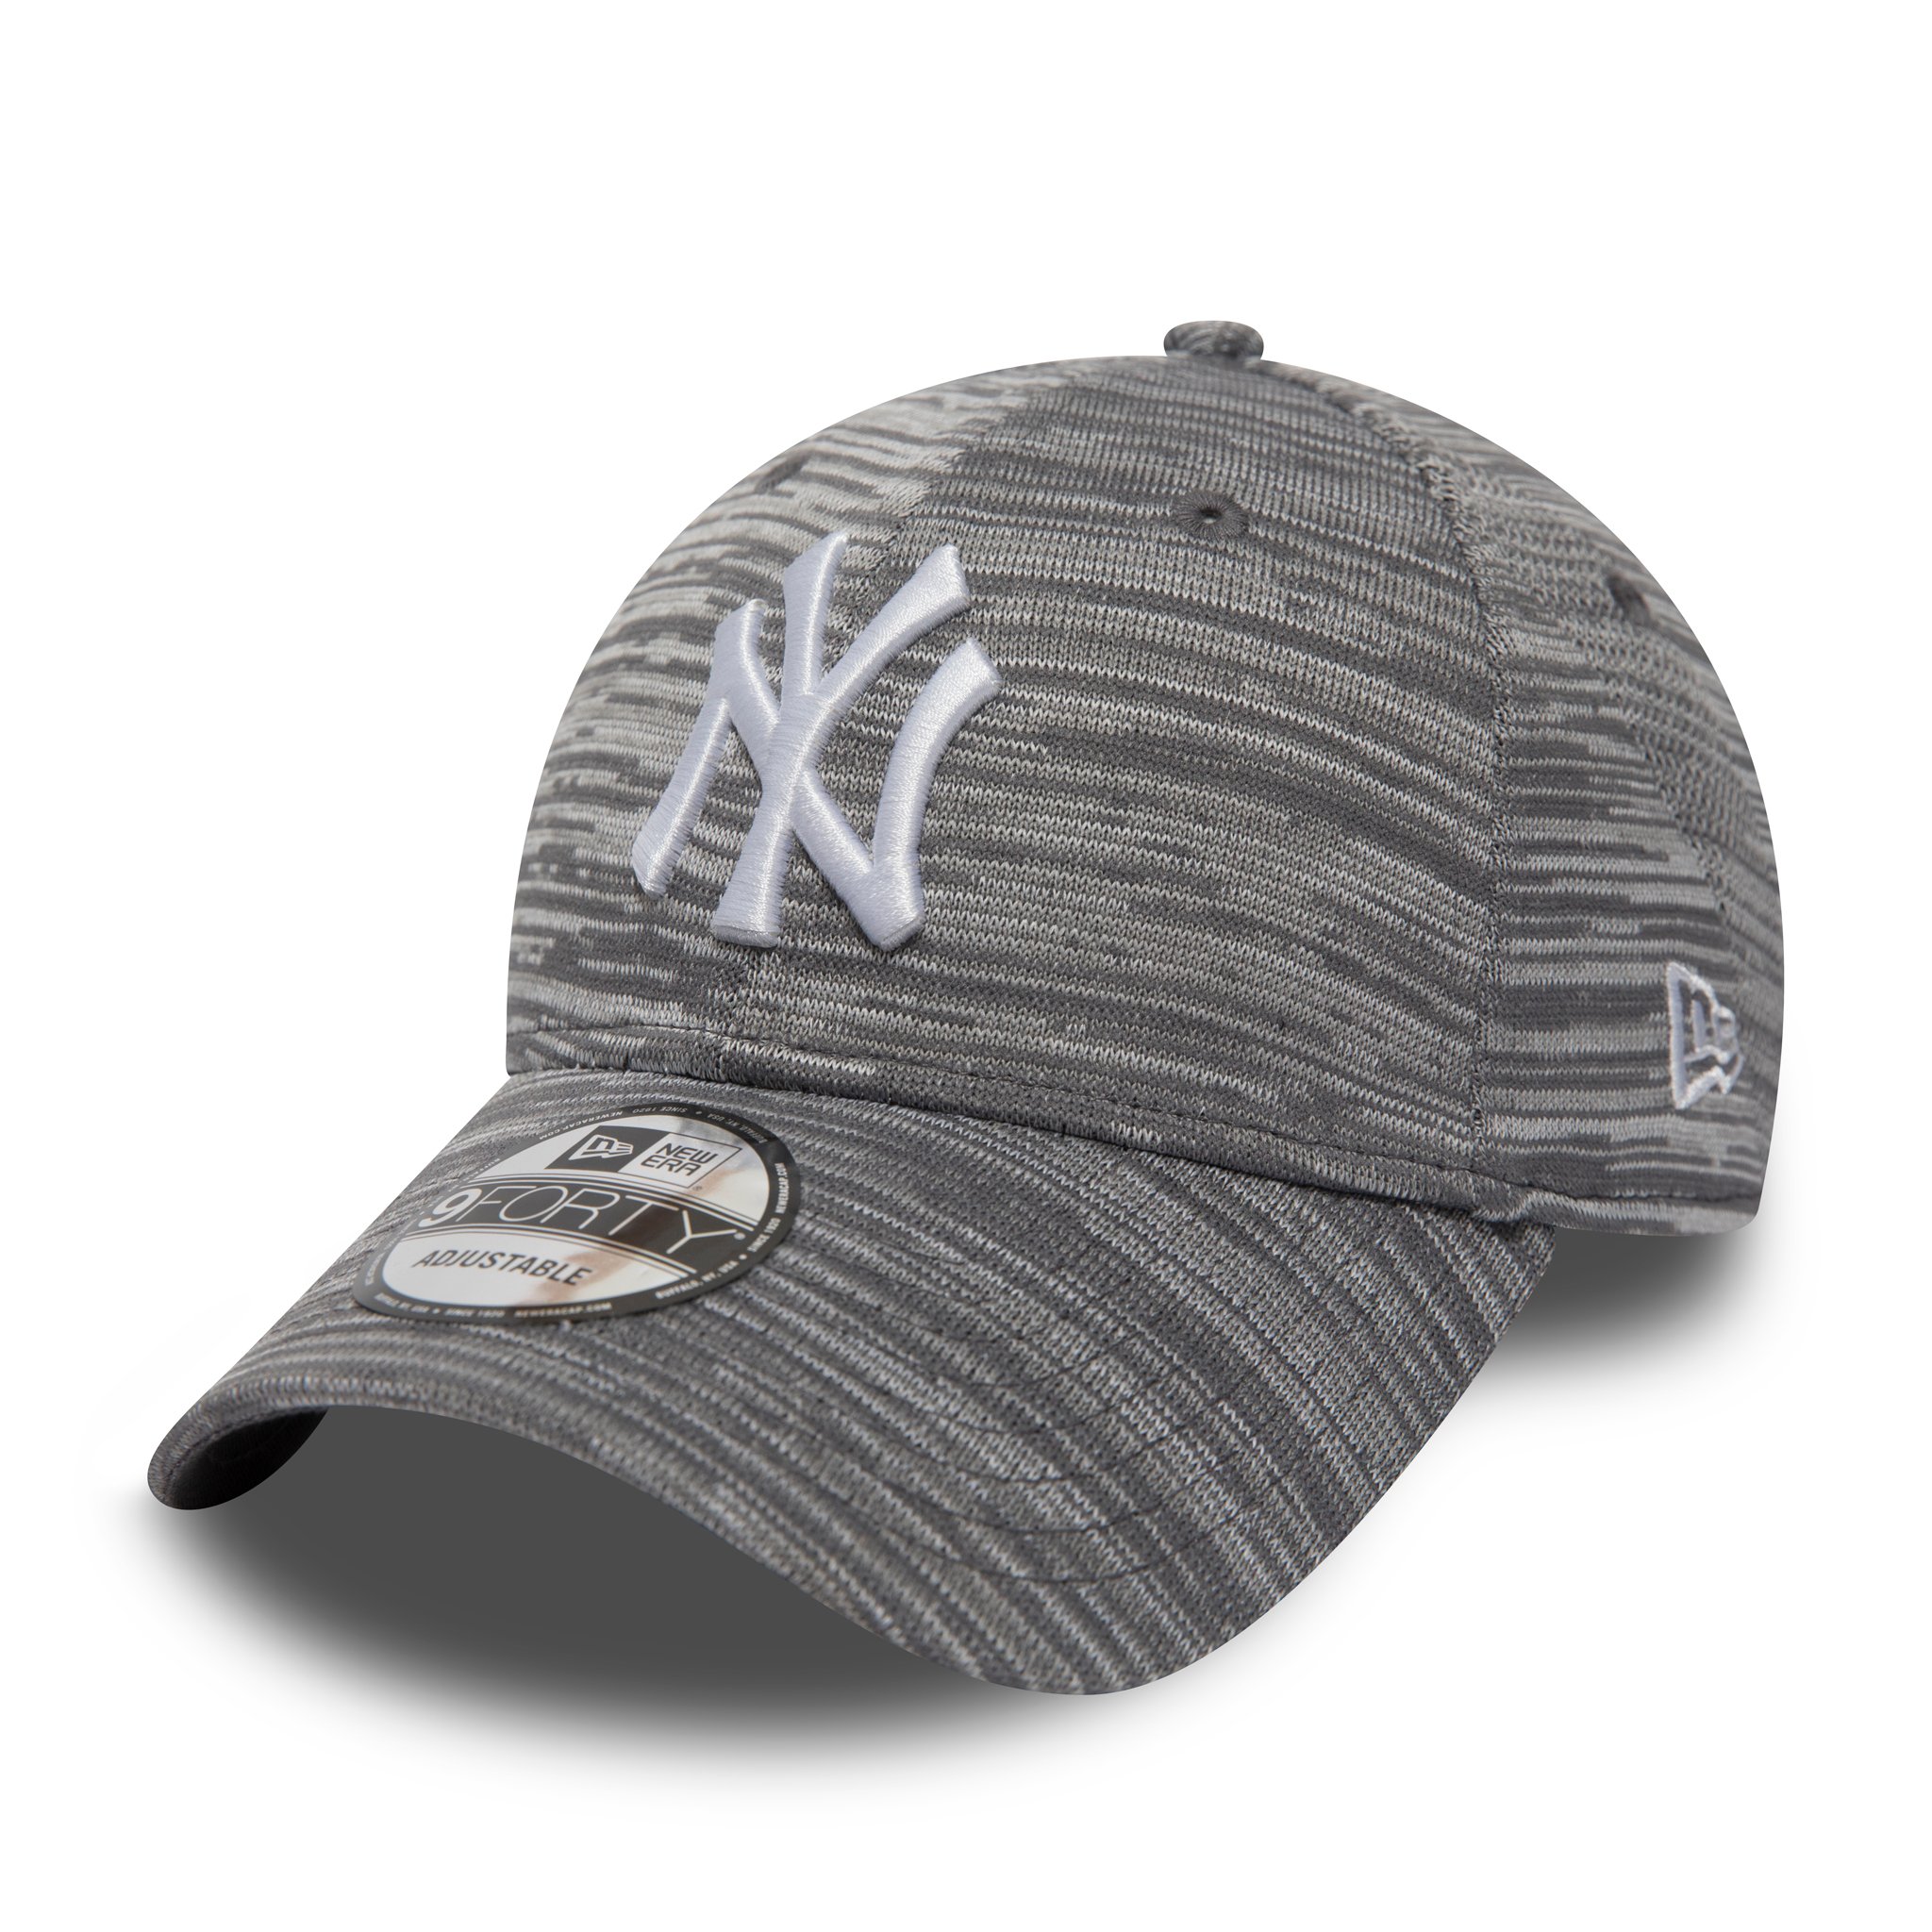 Gorra New York Yankees Engineered Fit 9FORTY, gris